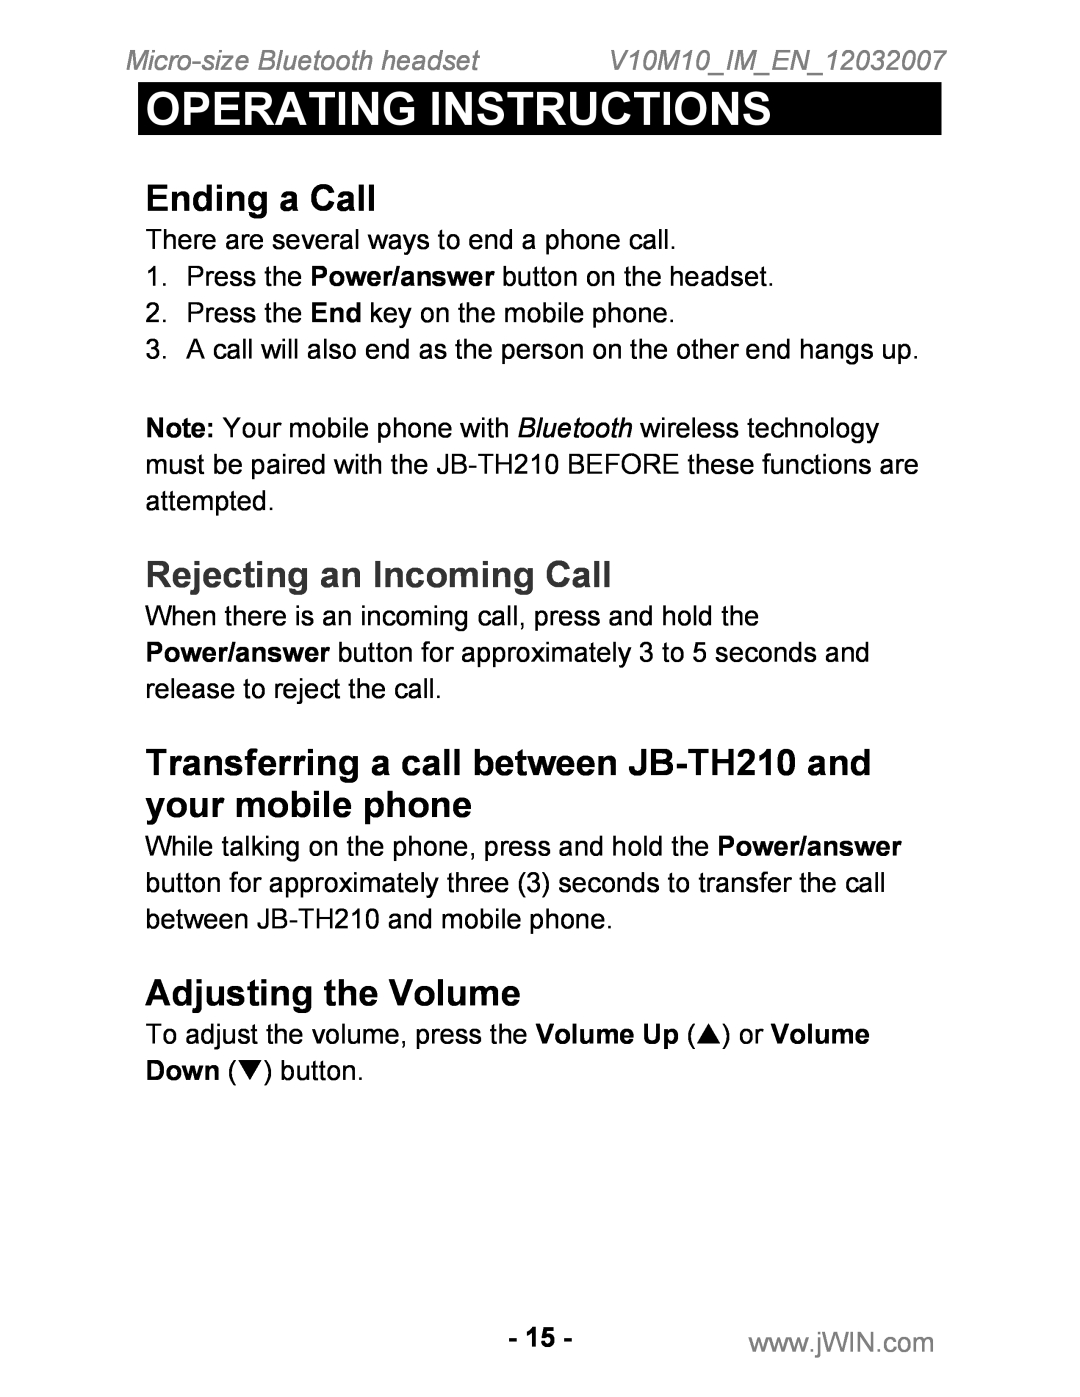 Jwin JB-TH210 instruction manual Ending a Call, Rejecting an Incoming Call, Adjusting the Volume, Operating Instructions 